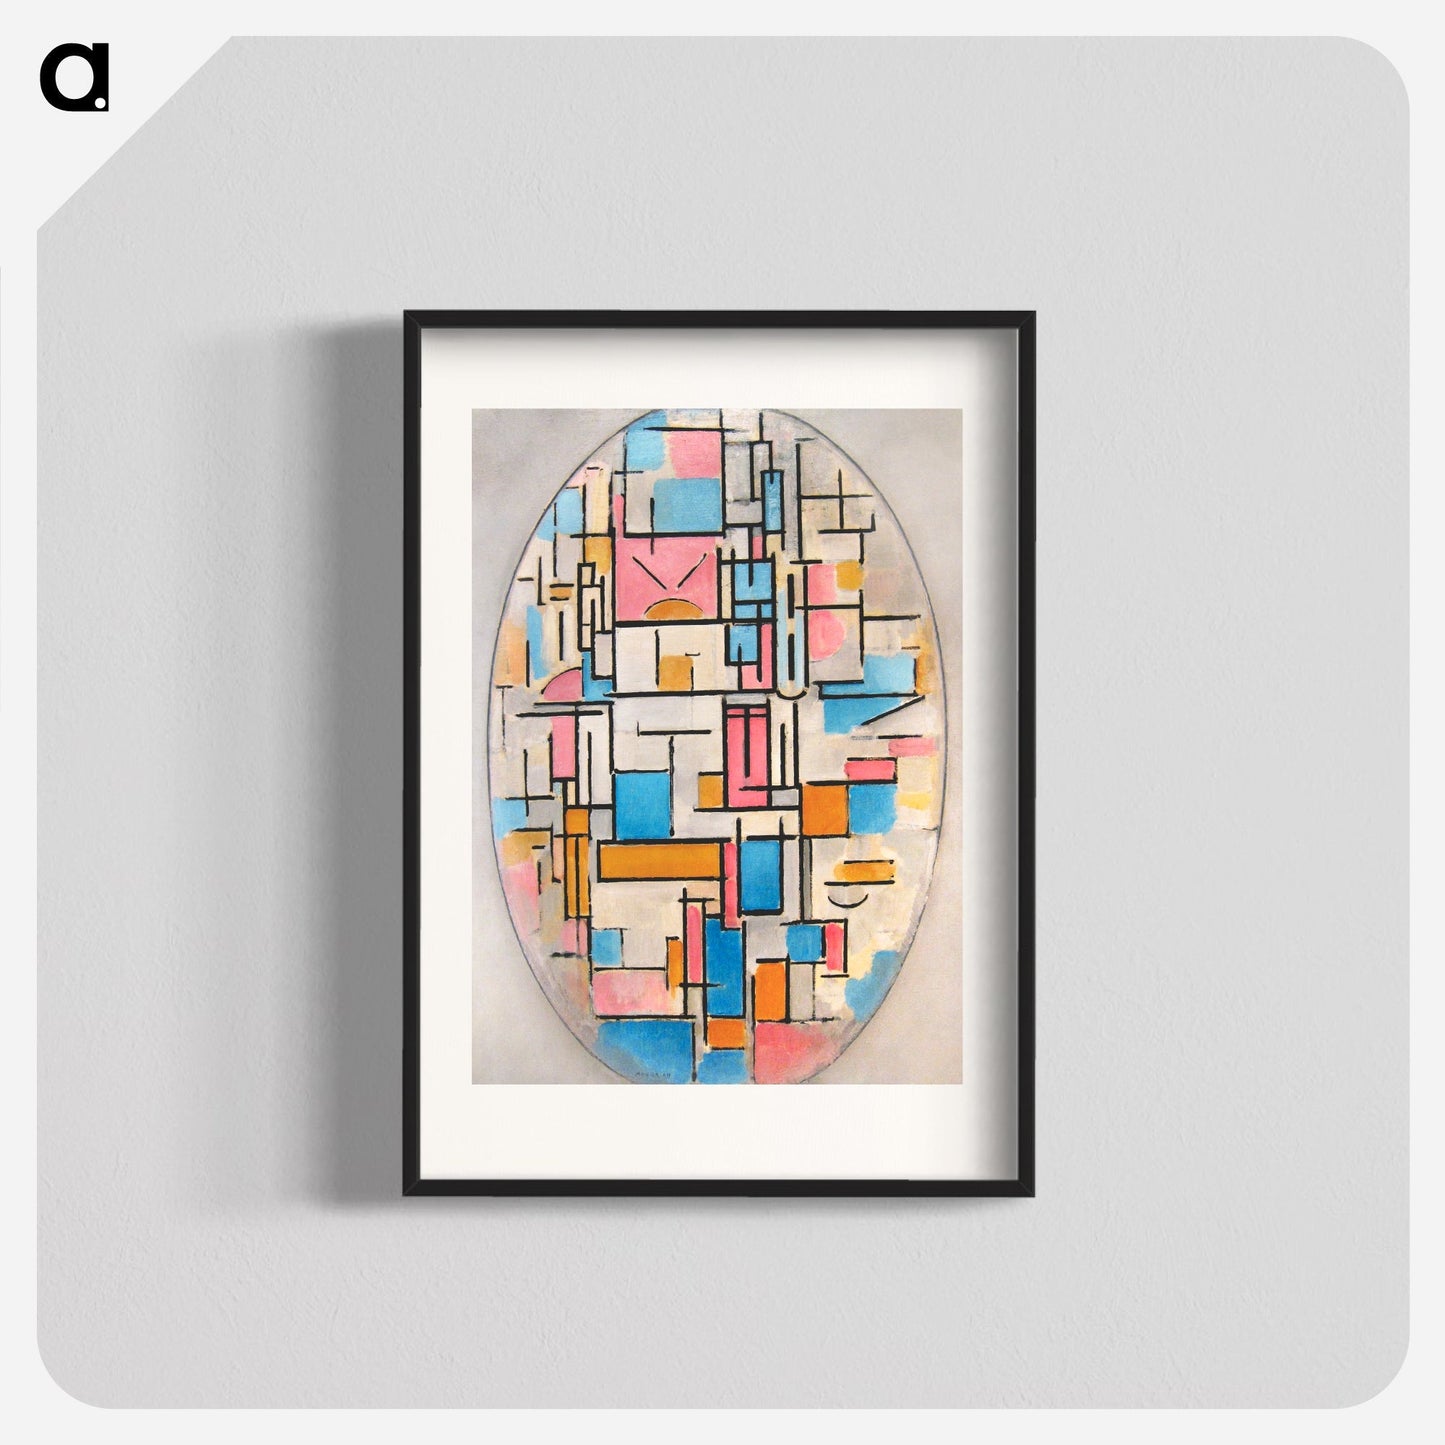 Composition in Oval with Color Planes 1 Poster. - artgraph.